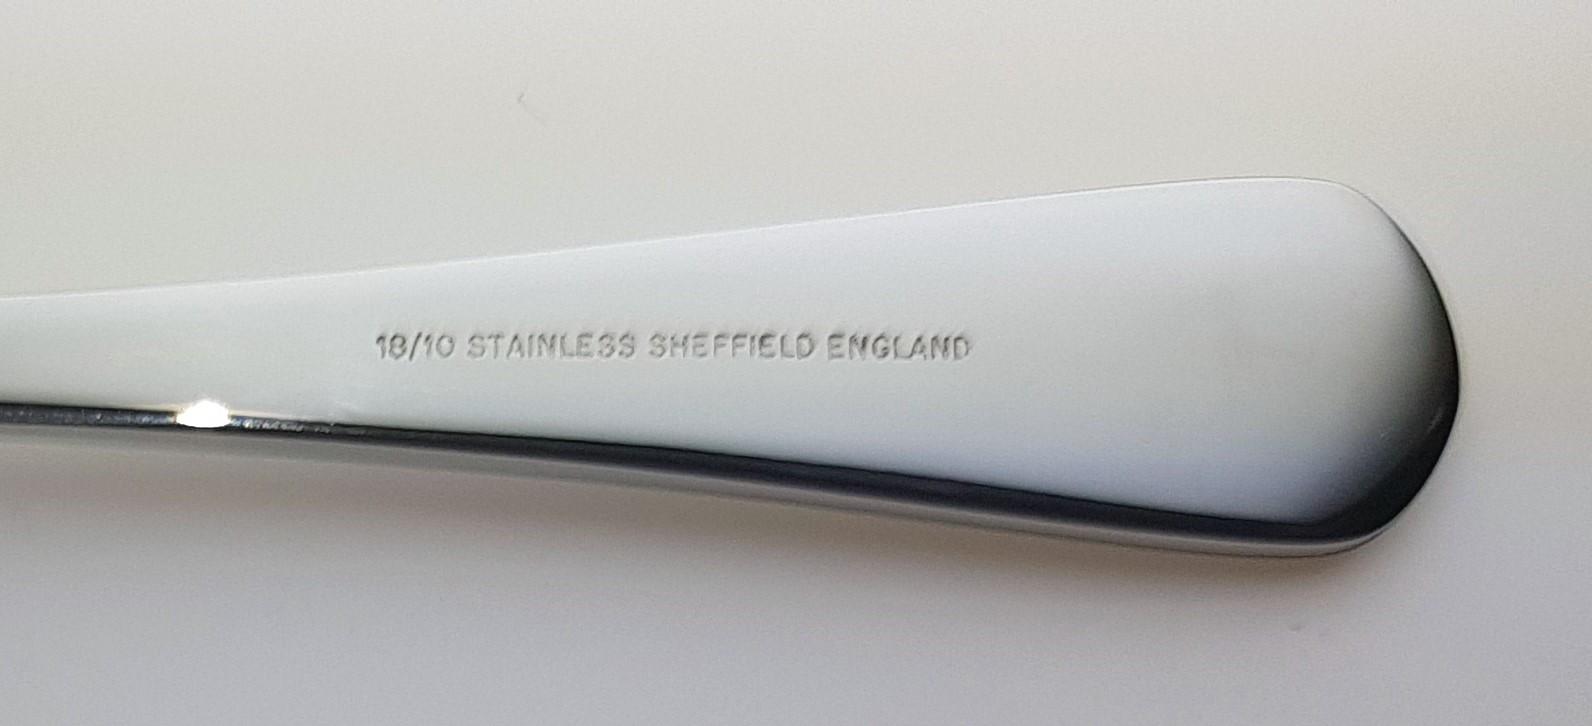 Brand New Stainless Steel Old English Dessert Fork Made In Sheffield England 